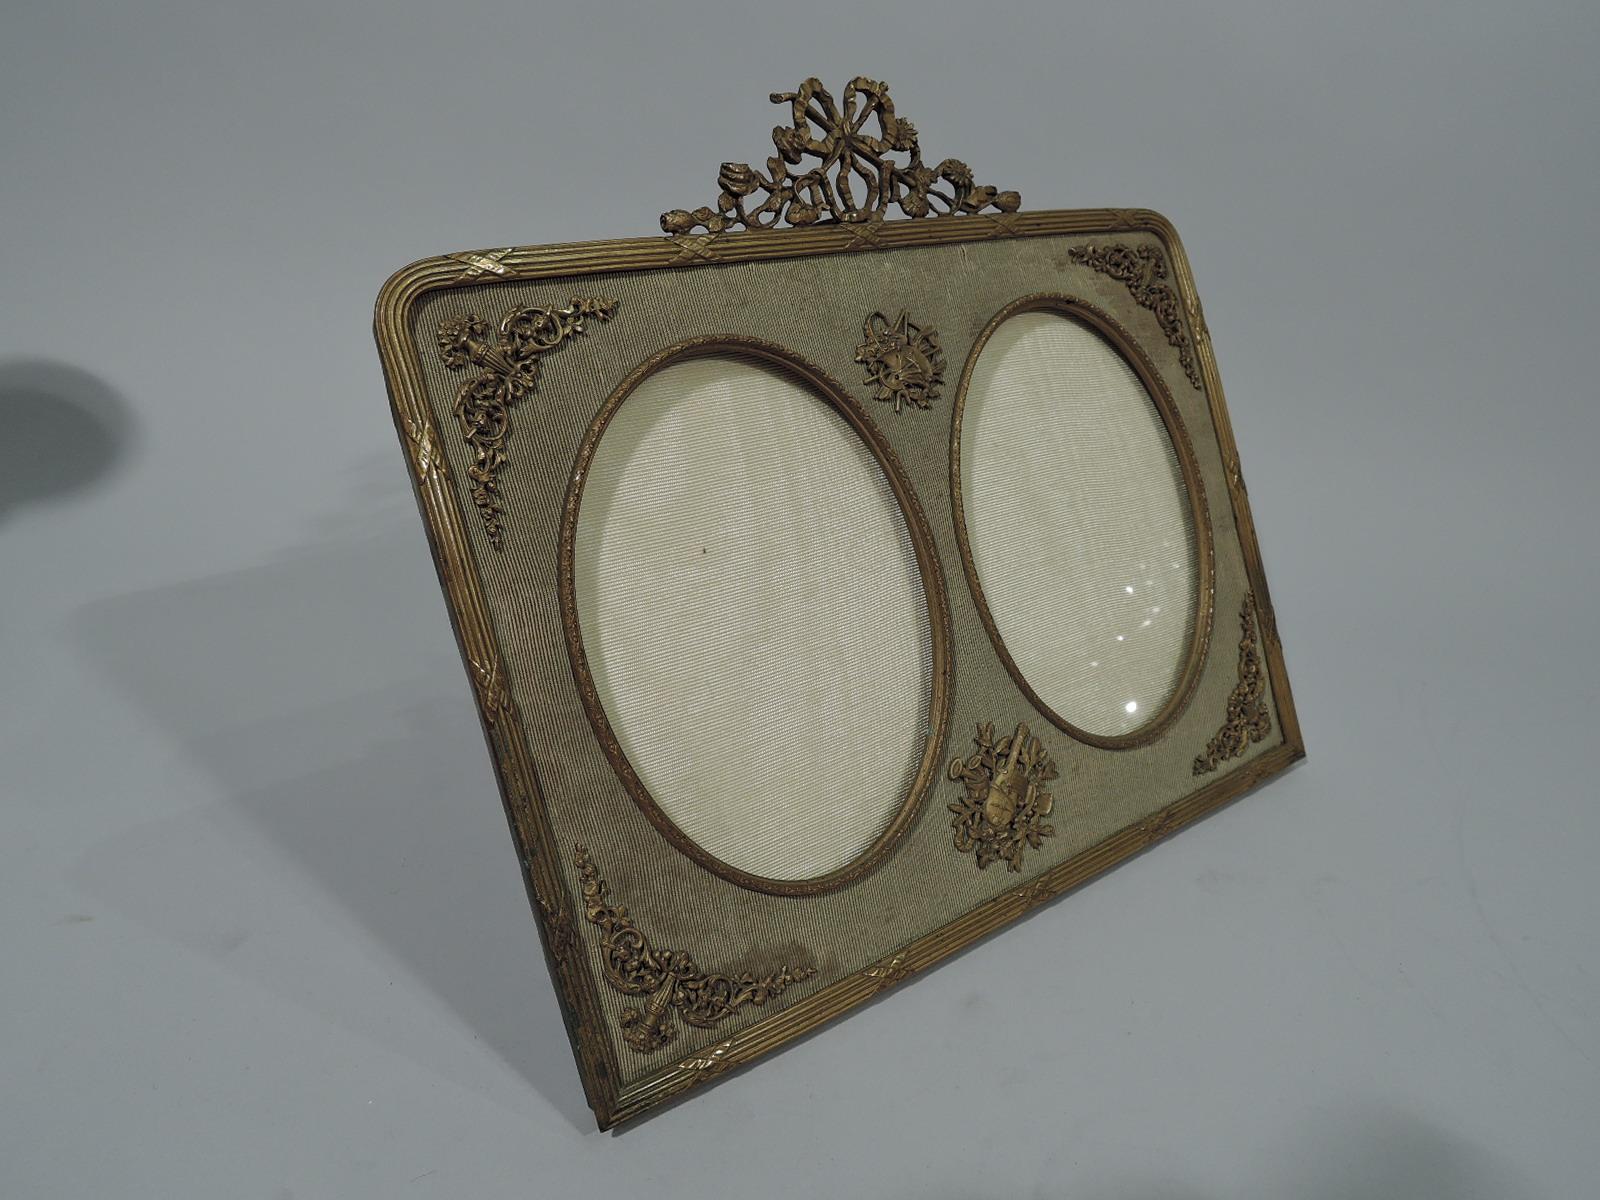 French Rococo Revival gilt-bronze double picture frame. Rectangular with curved corners, reeded rim, and bow-tied floral crown. Two vertical oval windows and ribbed textile ground applied with 18th-century-style garden and music trophies. Subdued,